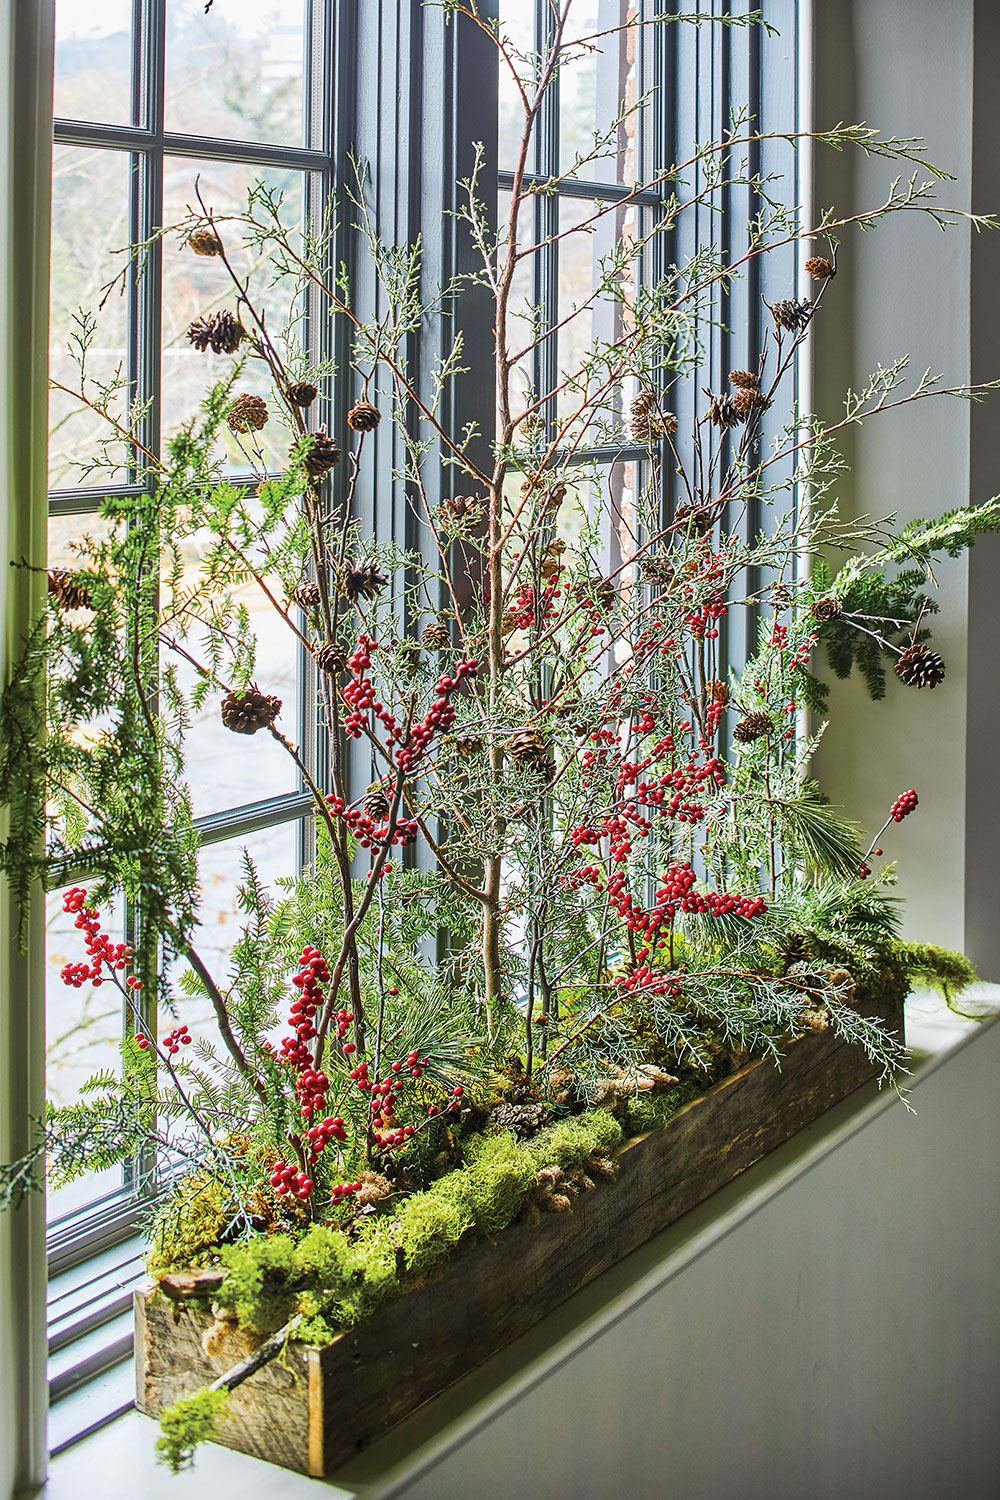 In a bright windowsill, an airy, tall arrangement of ilex berries, pine, and other branches of greenery spring from a rustic long wood box that is bedded with moss.